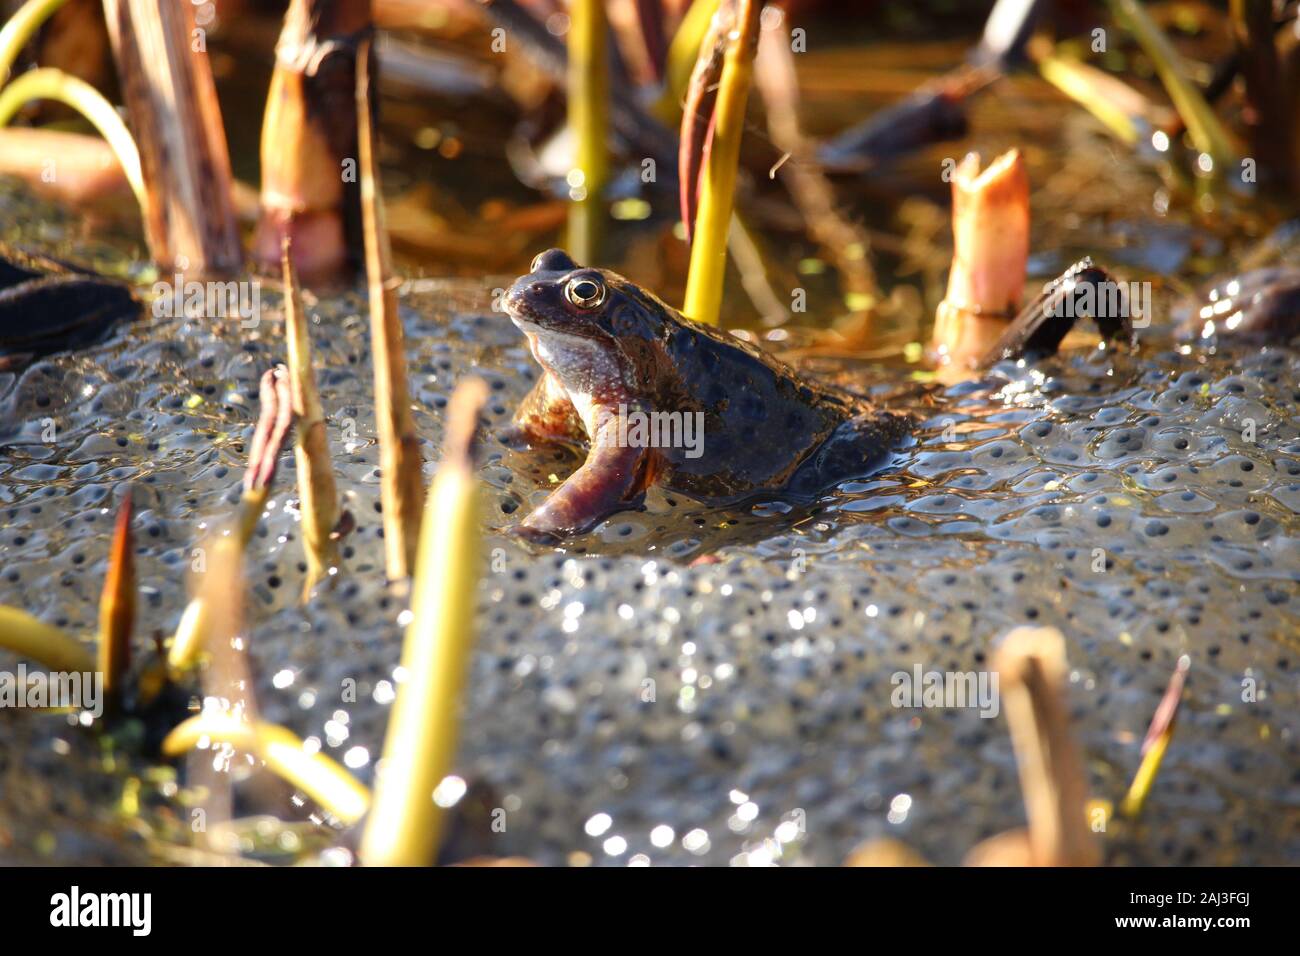 Adult common frog guarding and sitting on it's offspring ( frog spawn ) among pond reeds Stock Photo